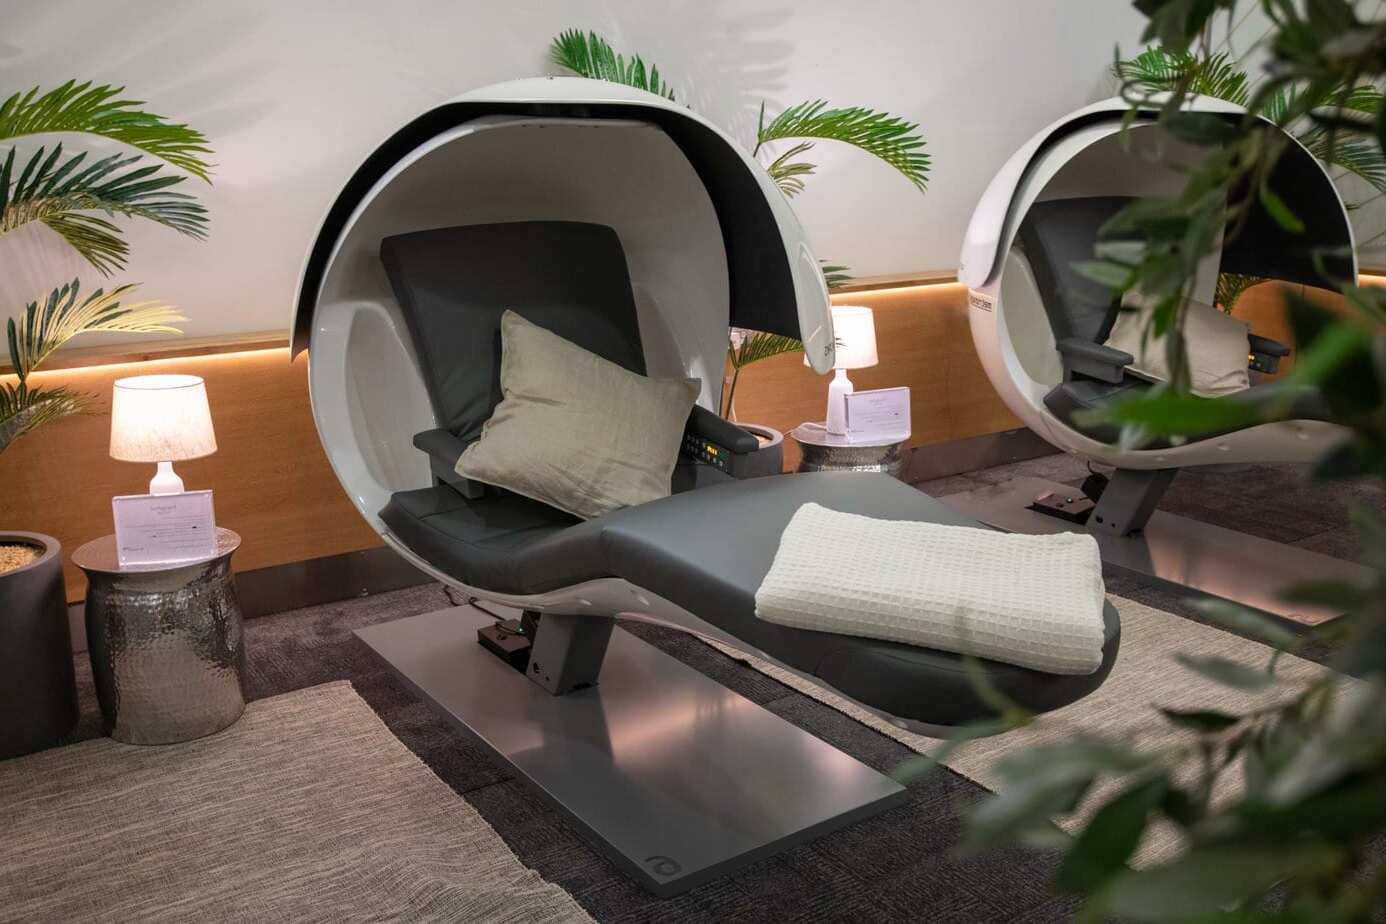 22-facts-about-airport-sleeping-pods